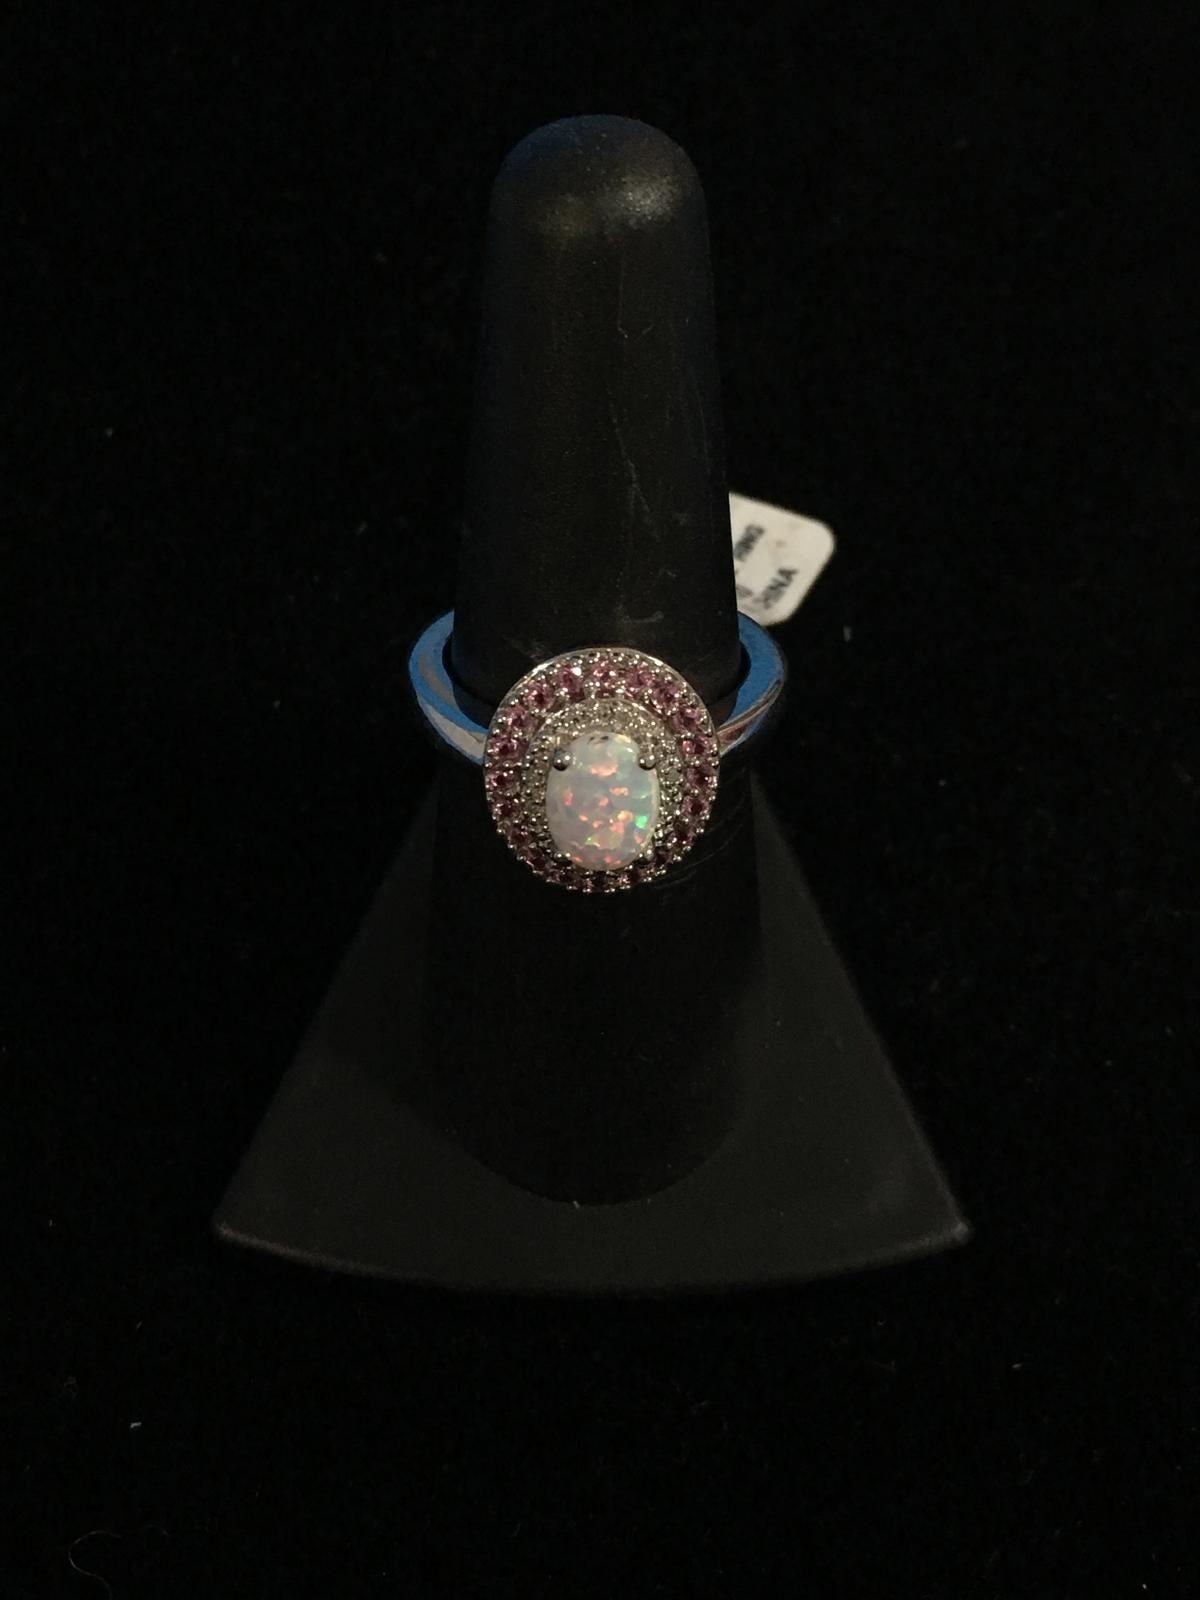 NEW KOHL'S IJ-I3 .02 CTW Opal & Pink Sapphire Sterling Silver Ring ($250) - Size 6.75